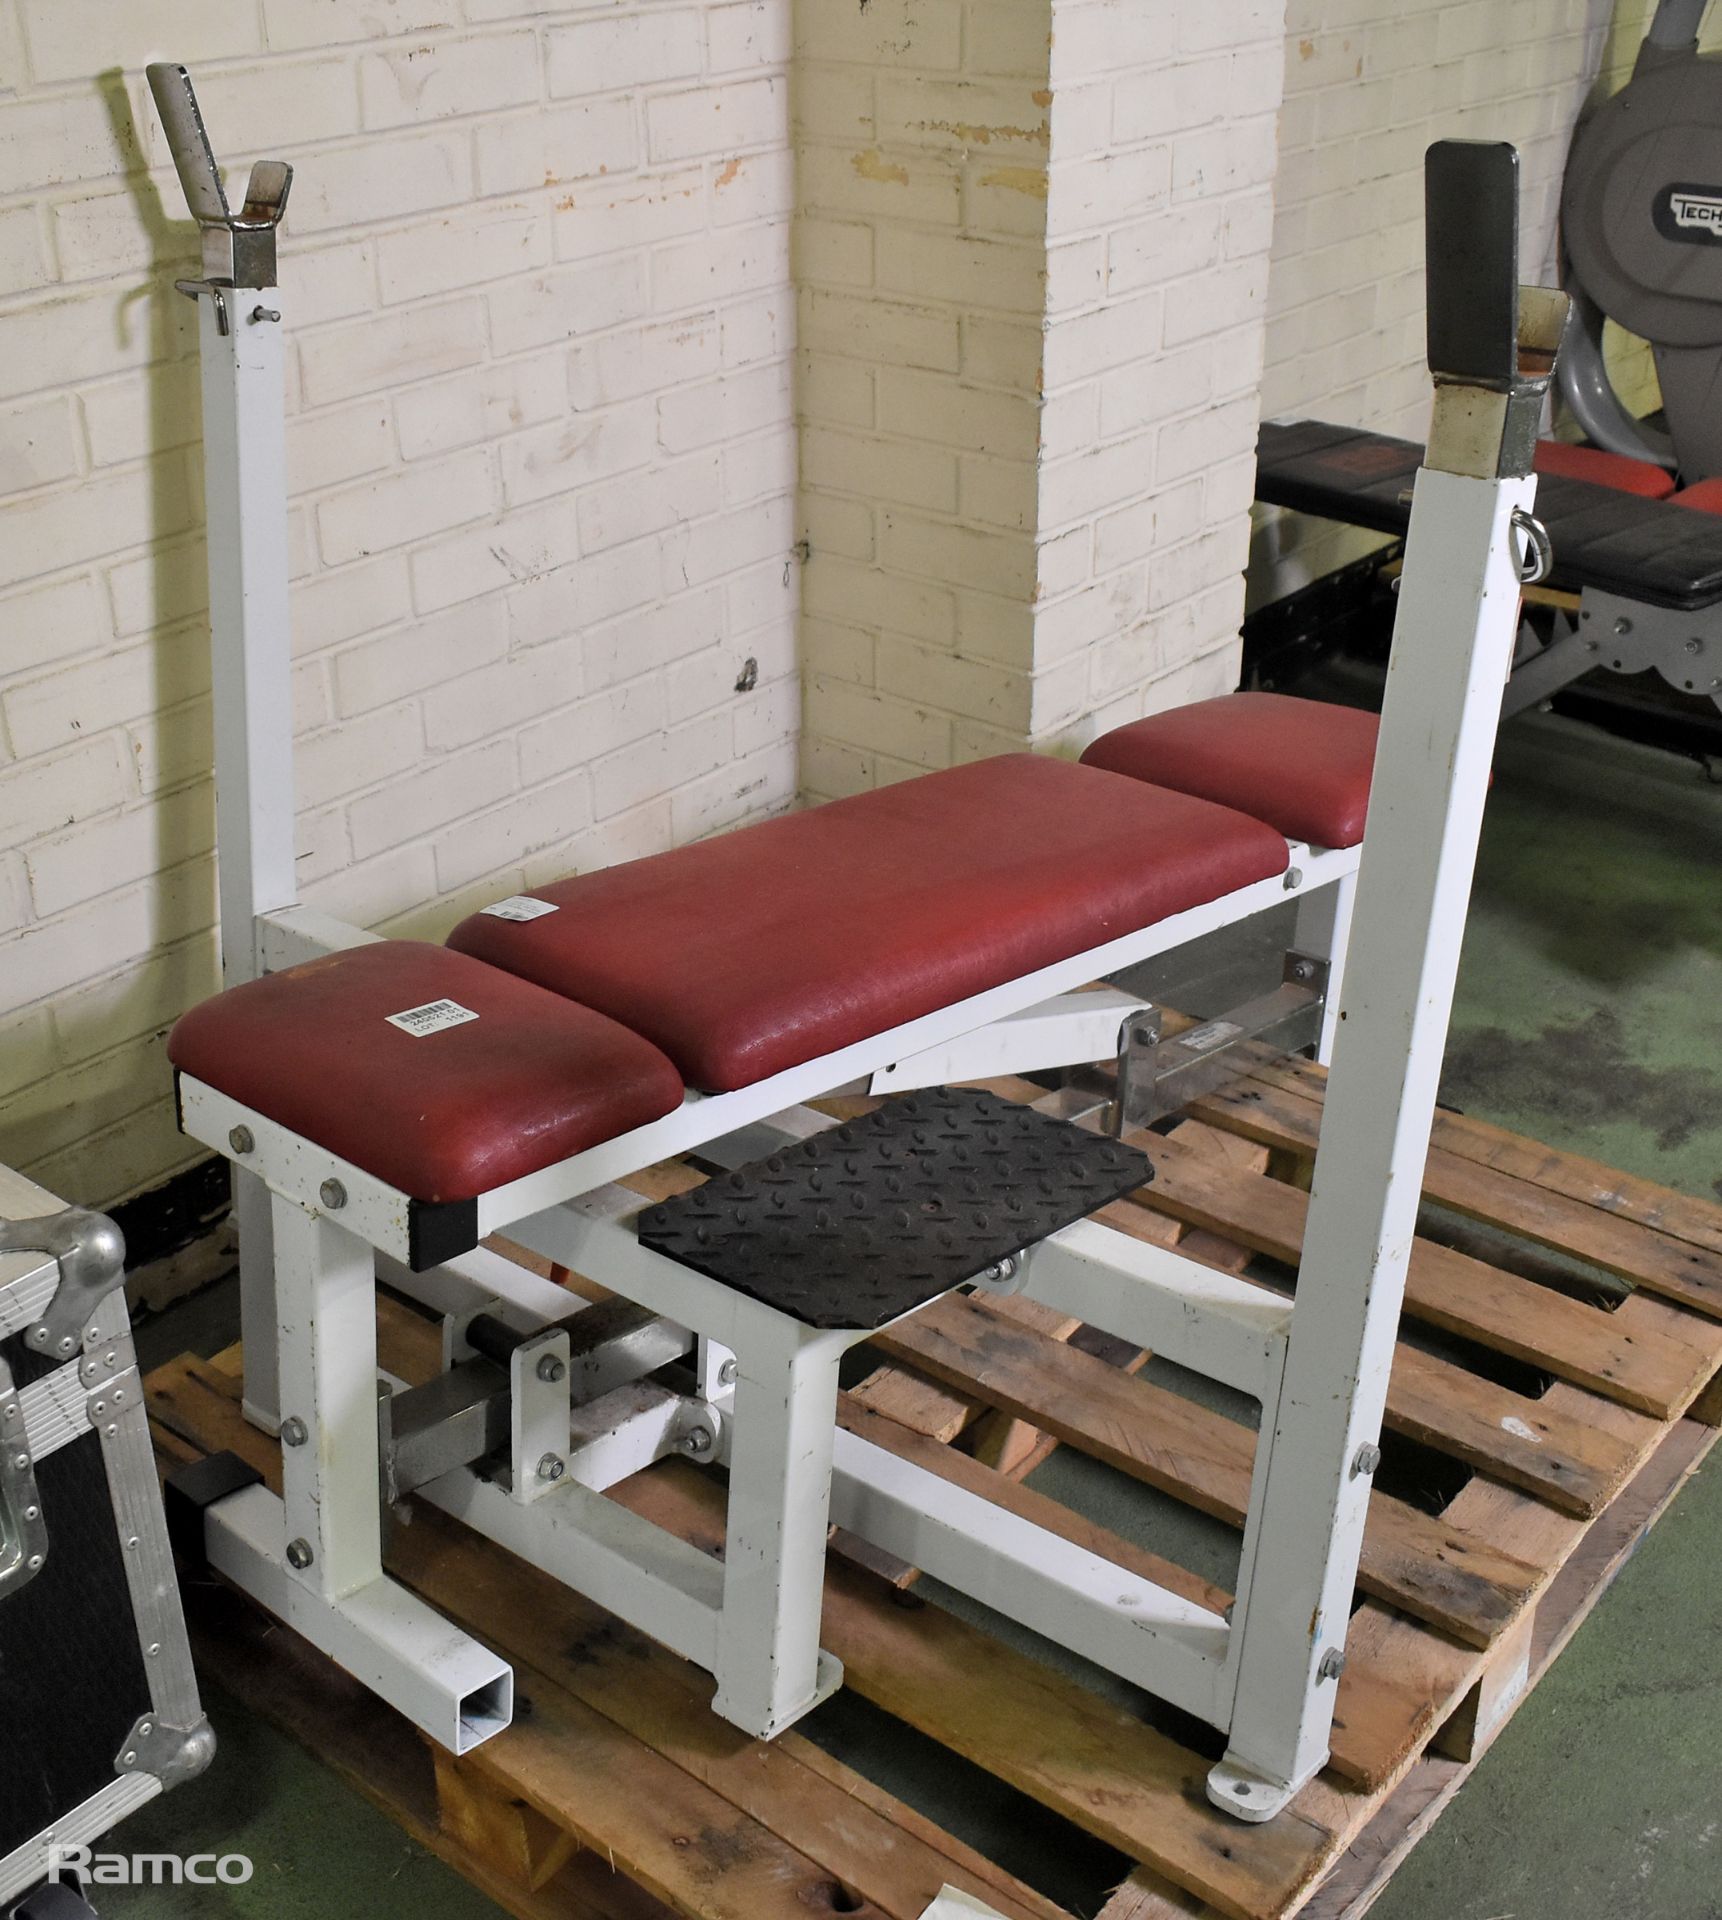 Powersport weight bench with barbell rack - W 1150 x D 1340 x H 1050mm - Image 3 of 7